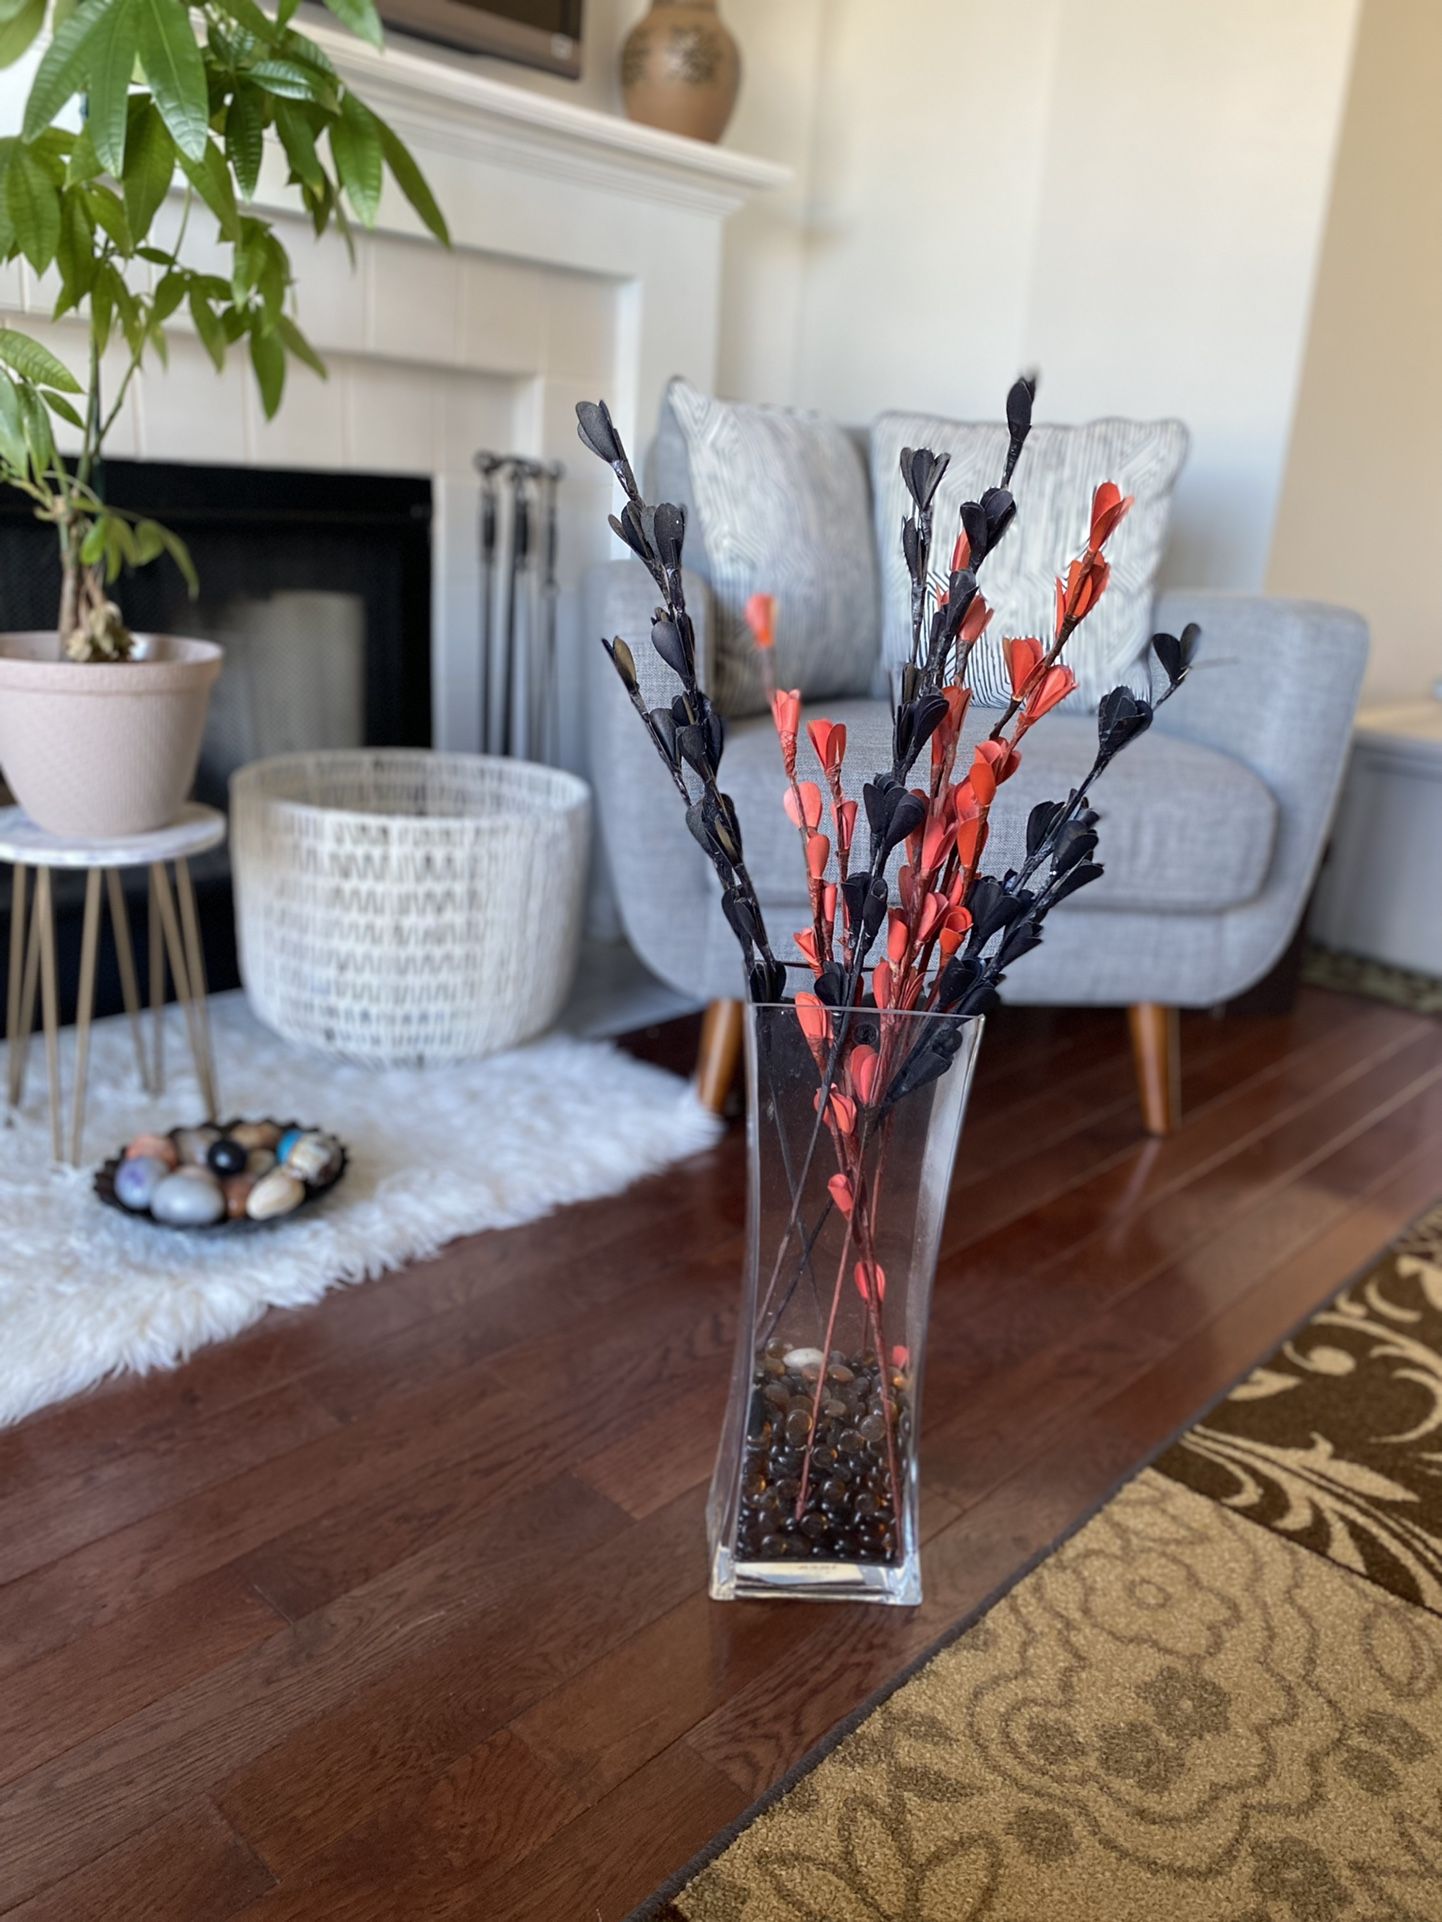 Glass Vase Including Pebbles And Black And Red Artificial Flowers, All For Only $10